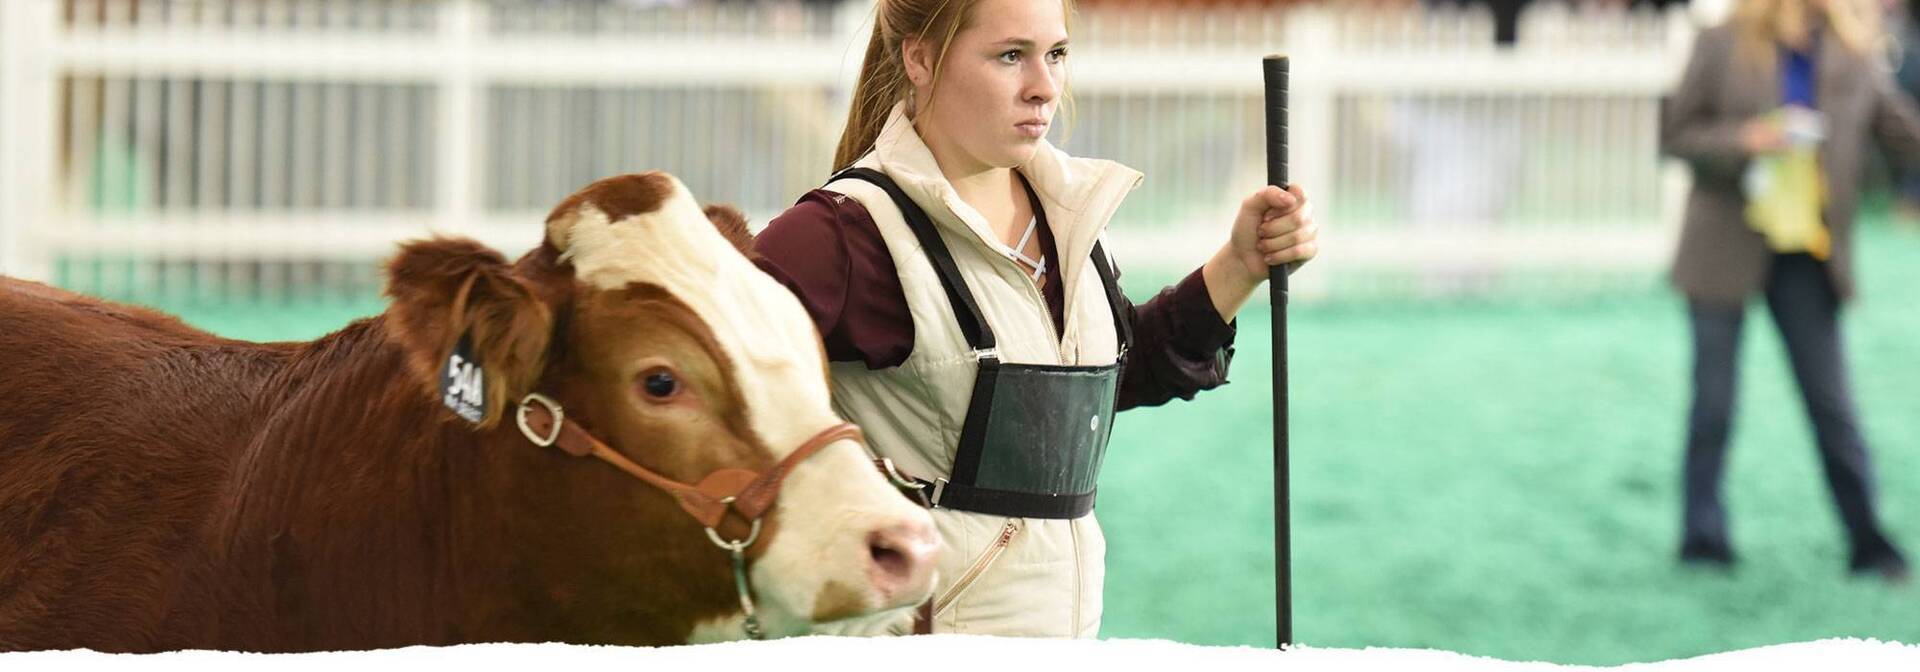 A young girl leads a cattle during a competition.